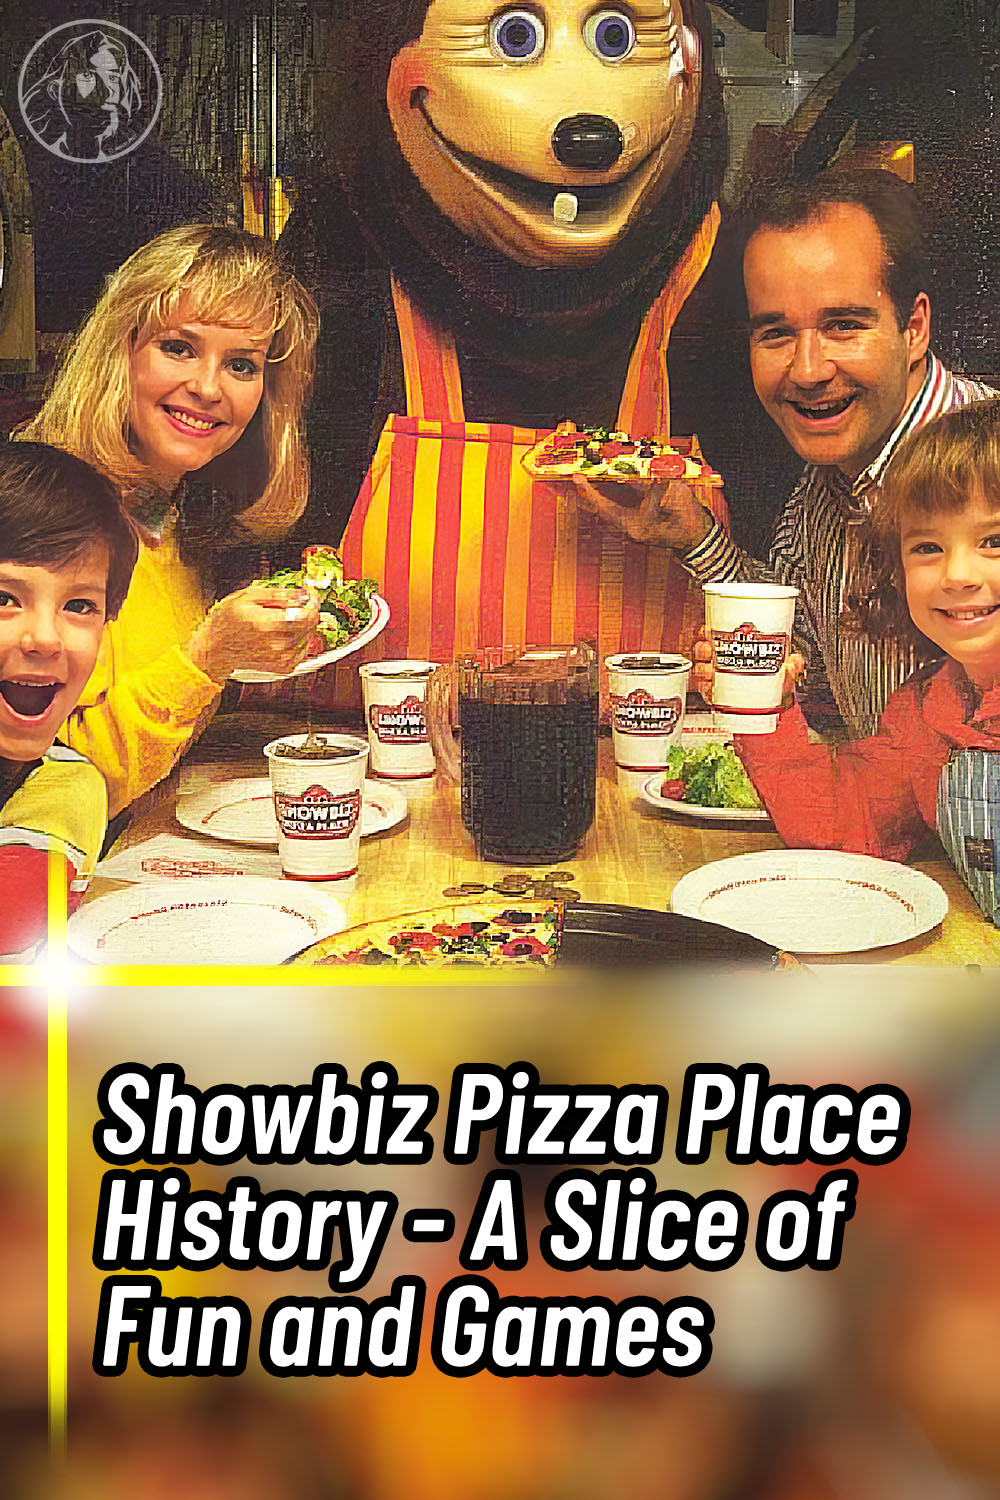 Showbiz Pizza Place History - A Slice of Fun and Games